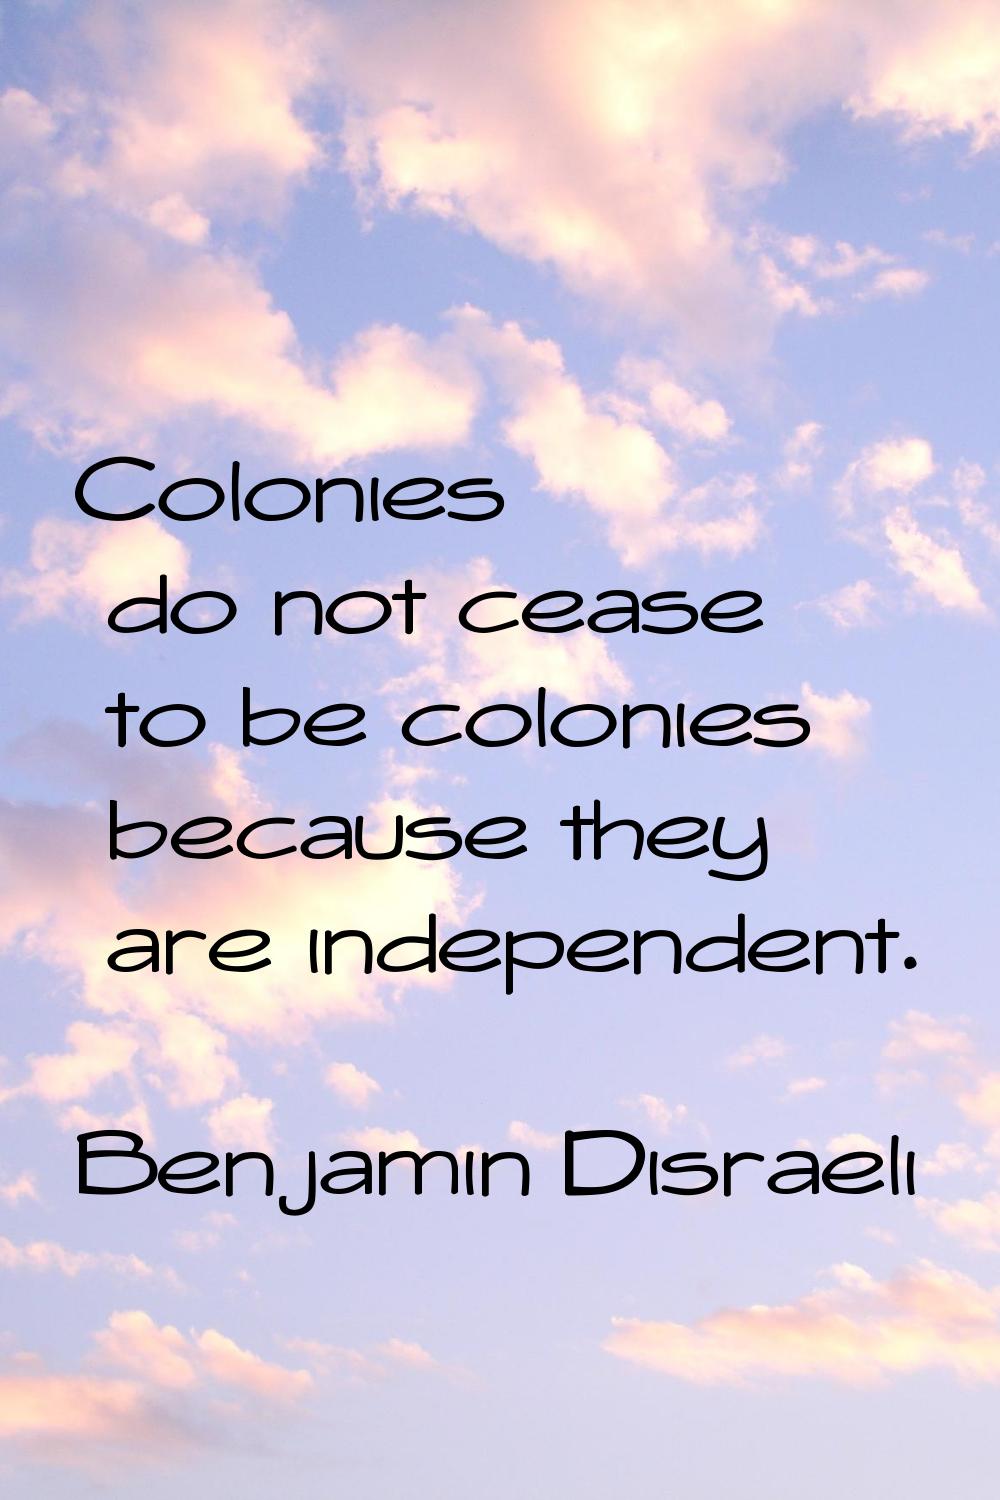 Colonies do not cease to be colonies because they are independent.